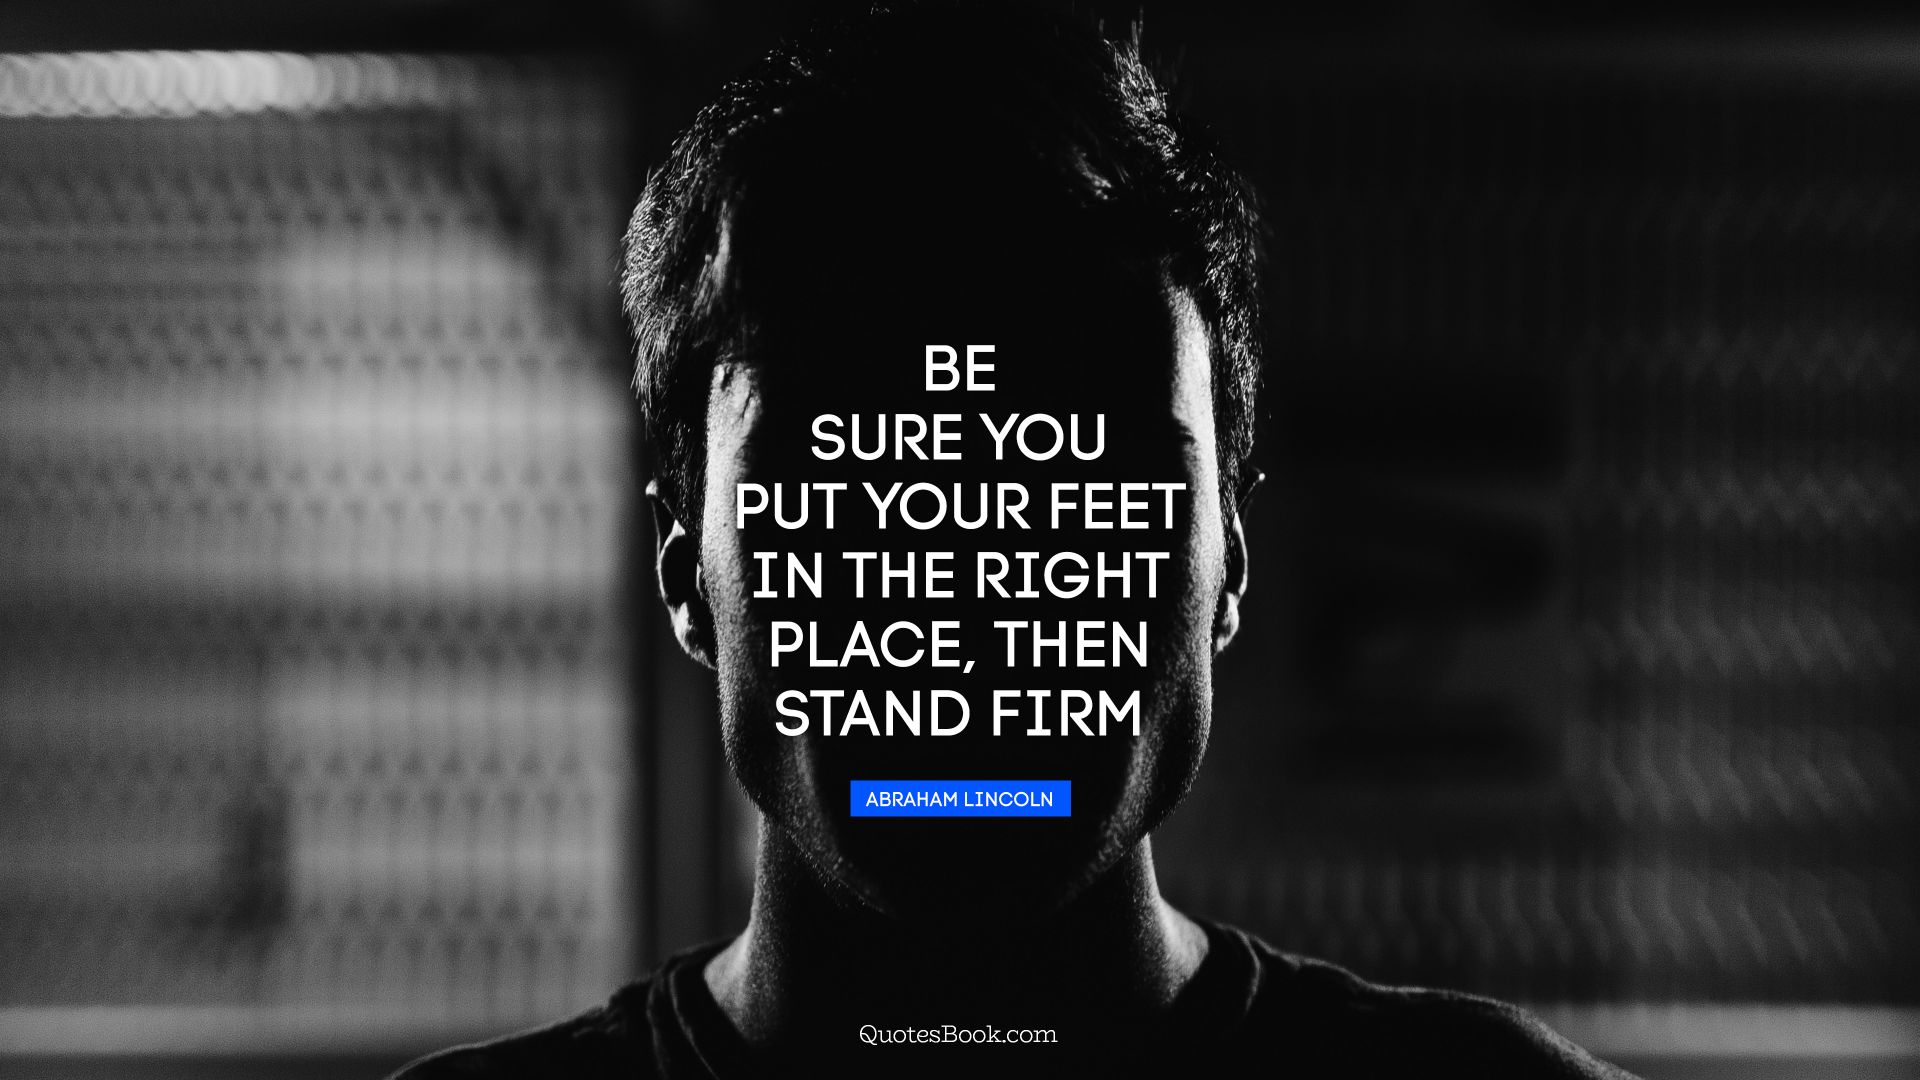 Be sure you put your feet in the right place, then stand firm. - Quote by Abraham Lincoln